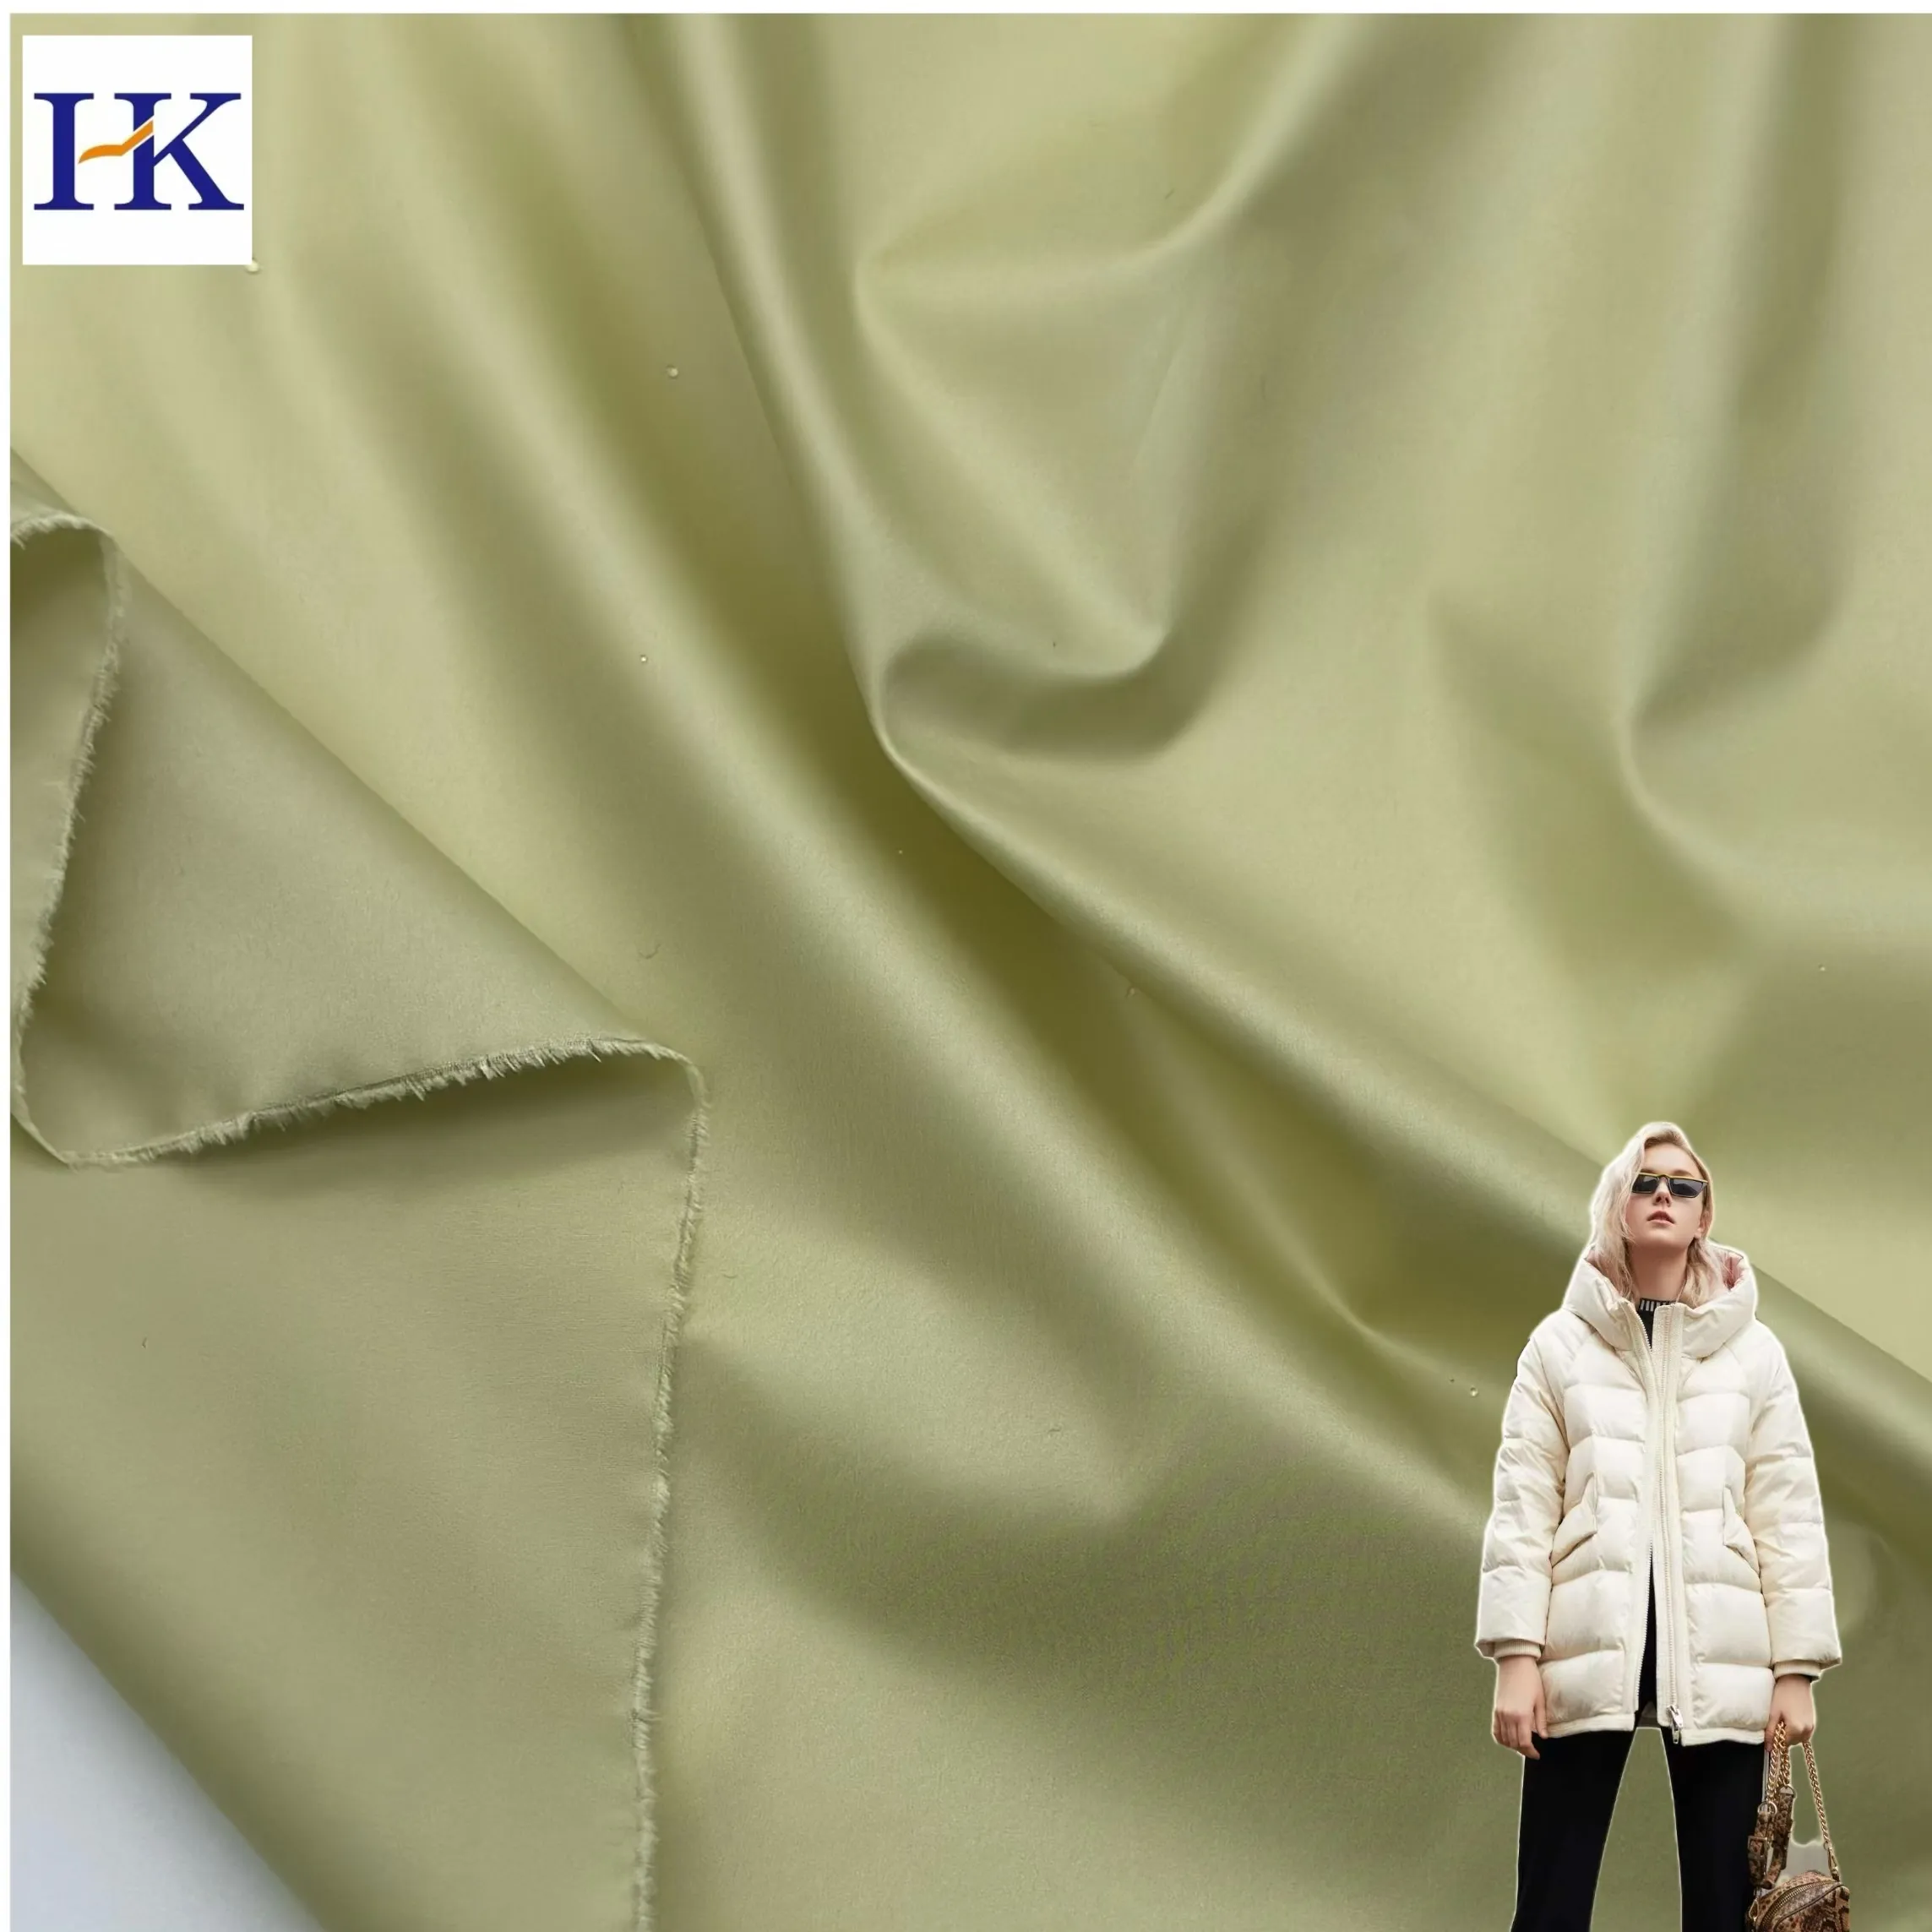 In stock 15D encrypted 520T plain weave spring Asian spinning down jacket polyester fabric